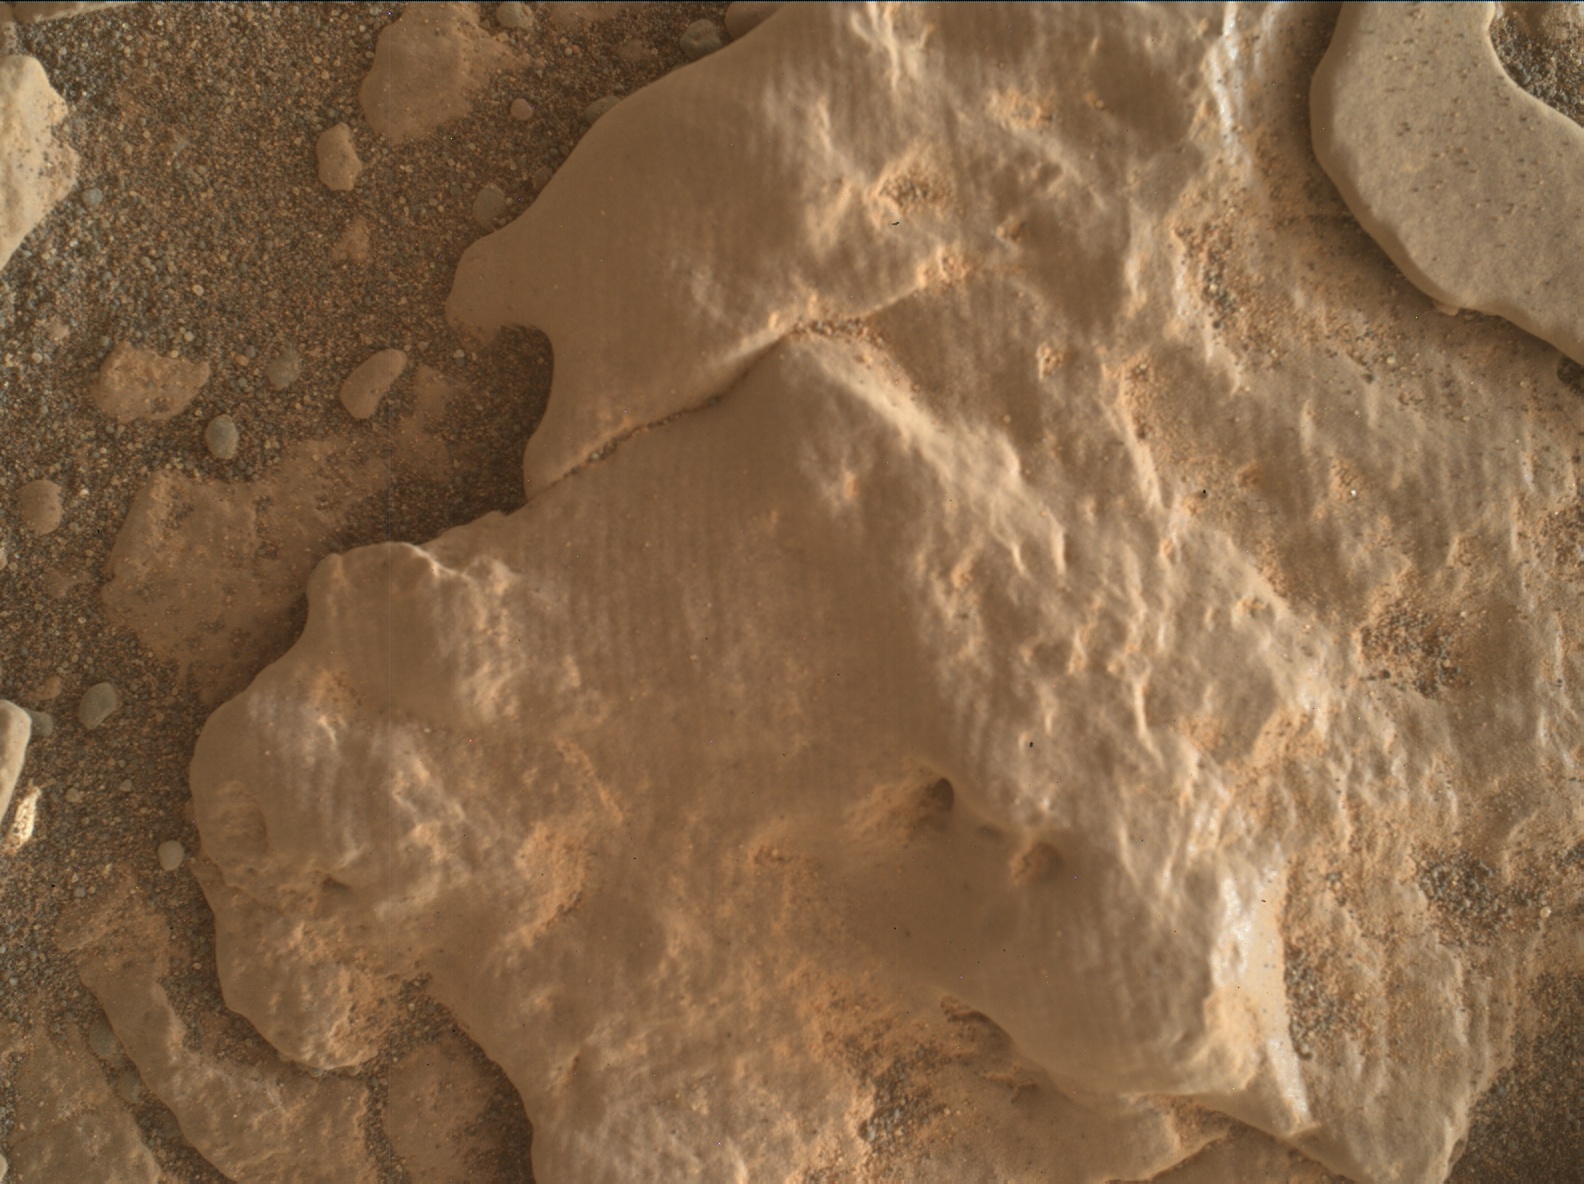 Nasa's Mars rover Curiosity acquired this image using its Mars Hand Lens Imager (MAHLI) on Sol 2819